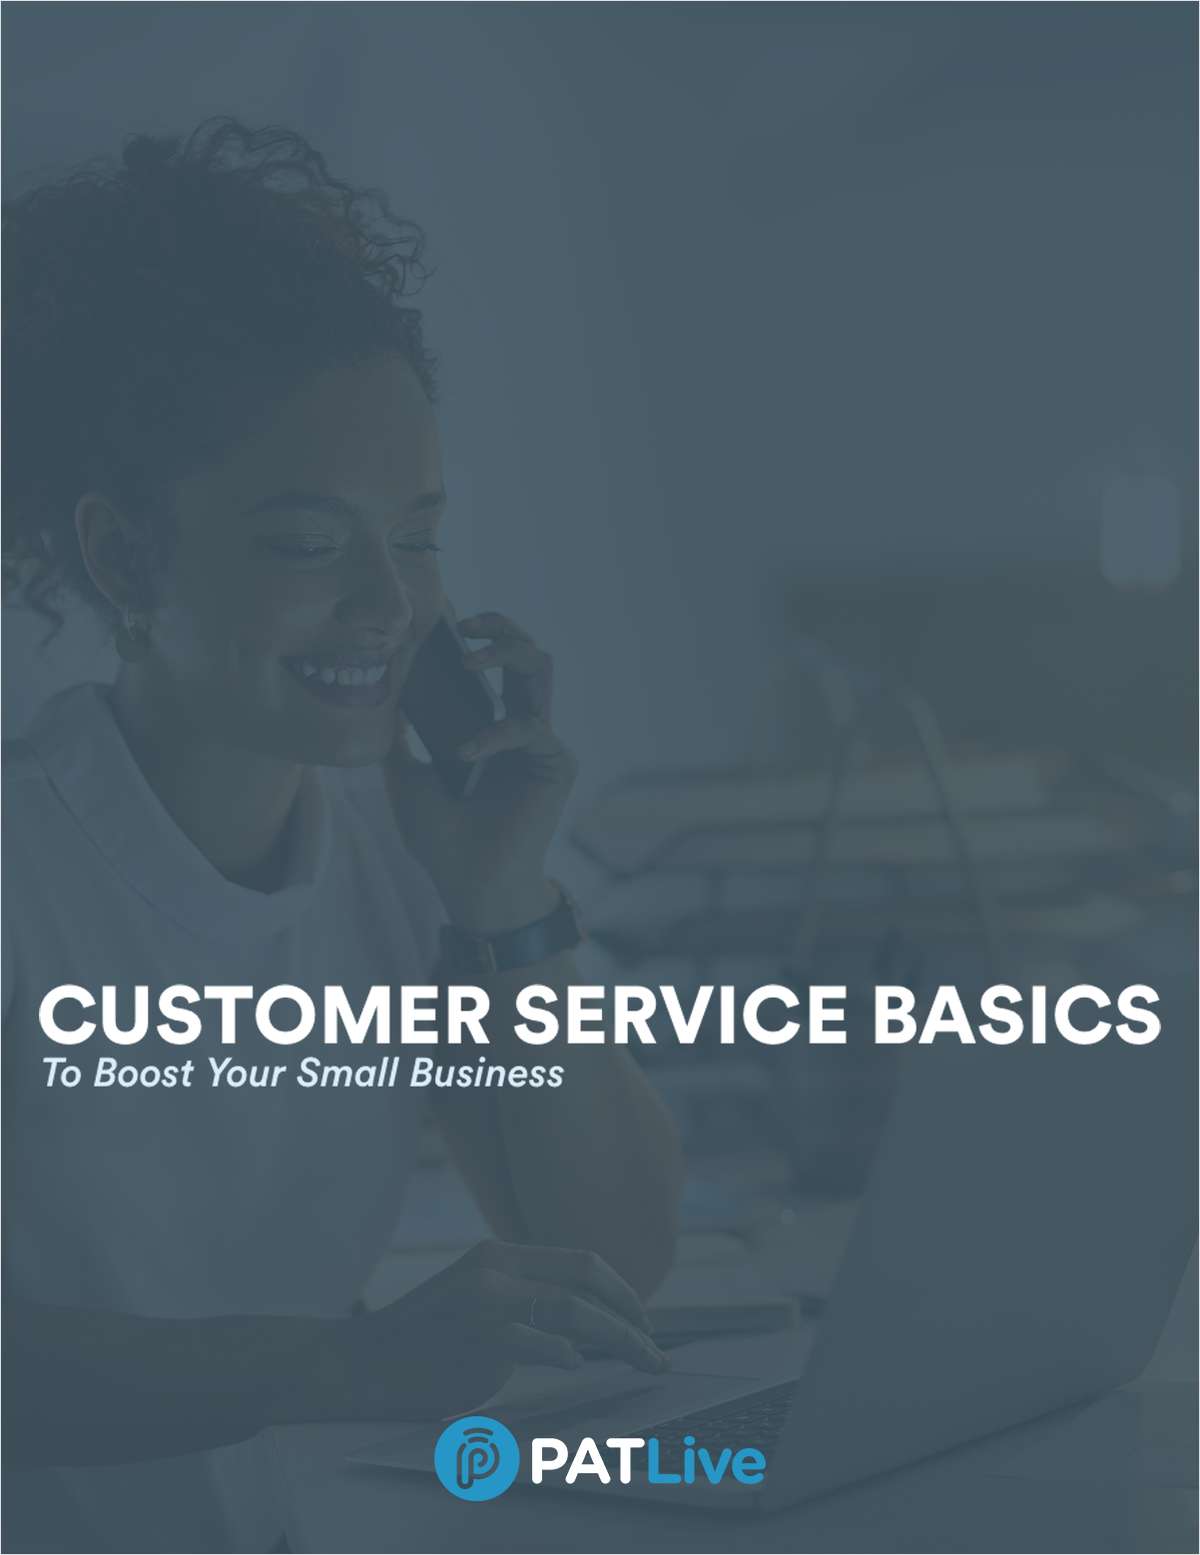 Customer Service Basics to Boost Your Small Business